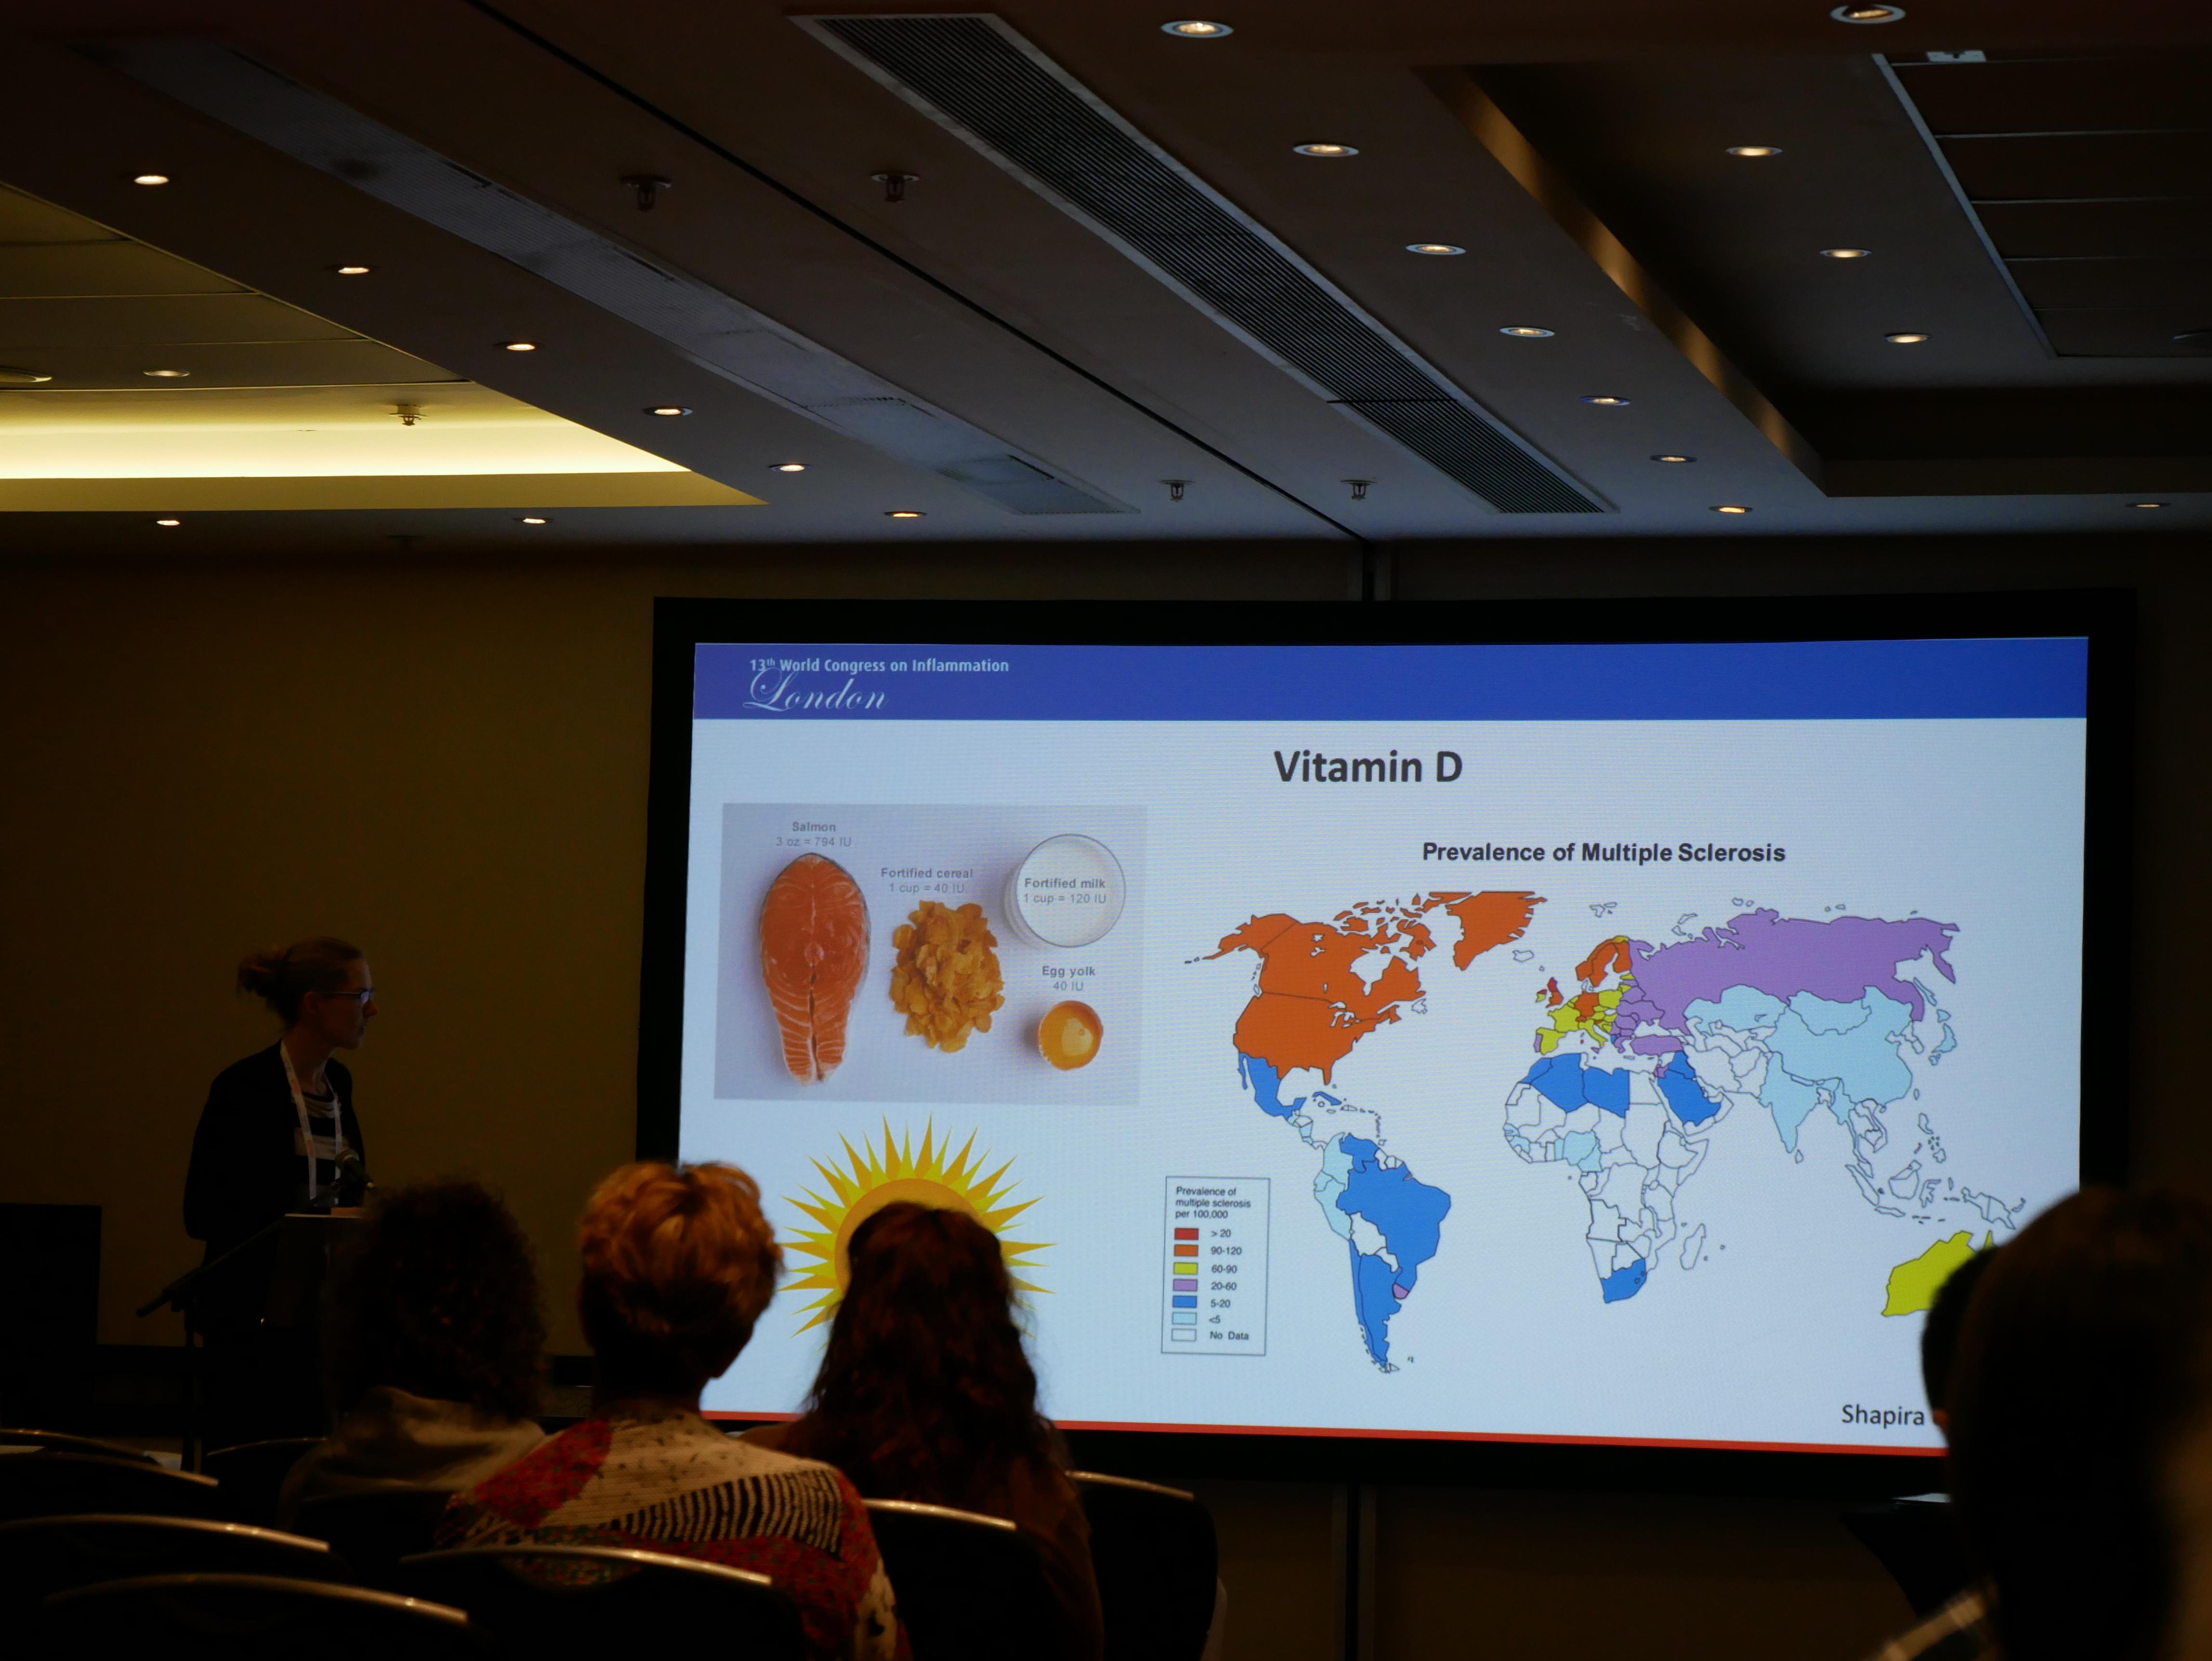 VitDAL work presented at World Congress of Inflammation